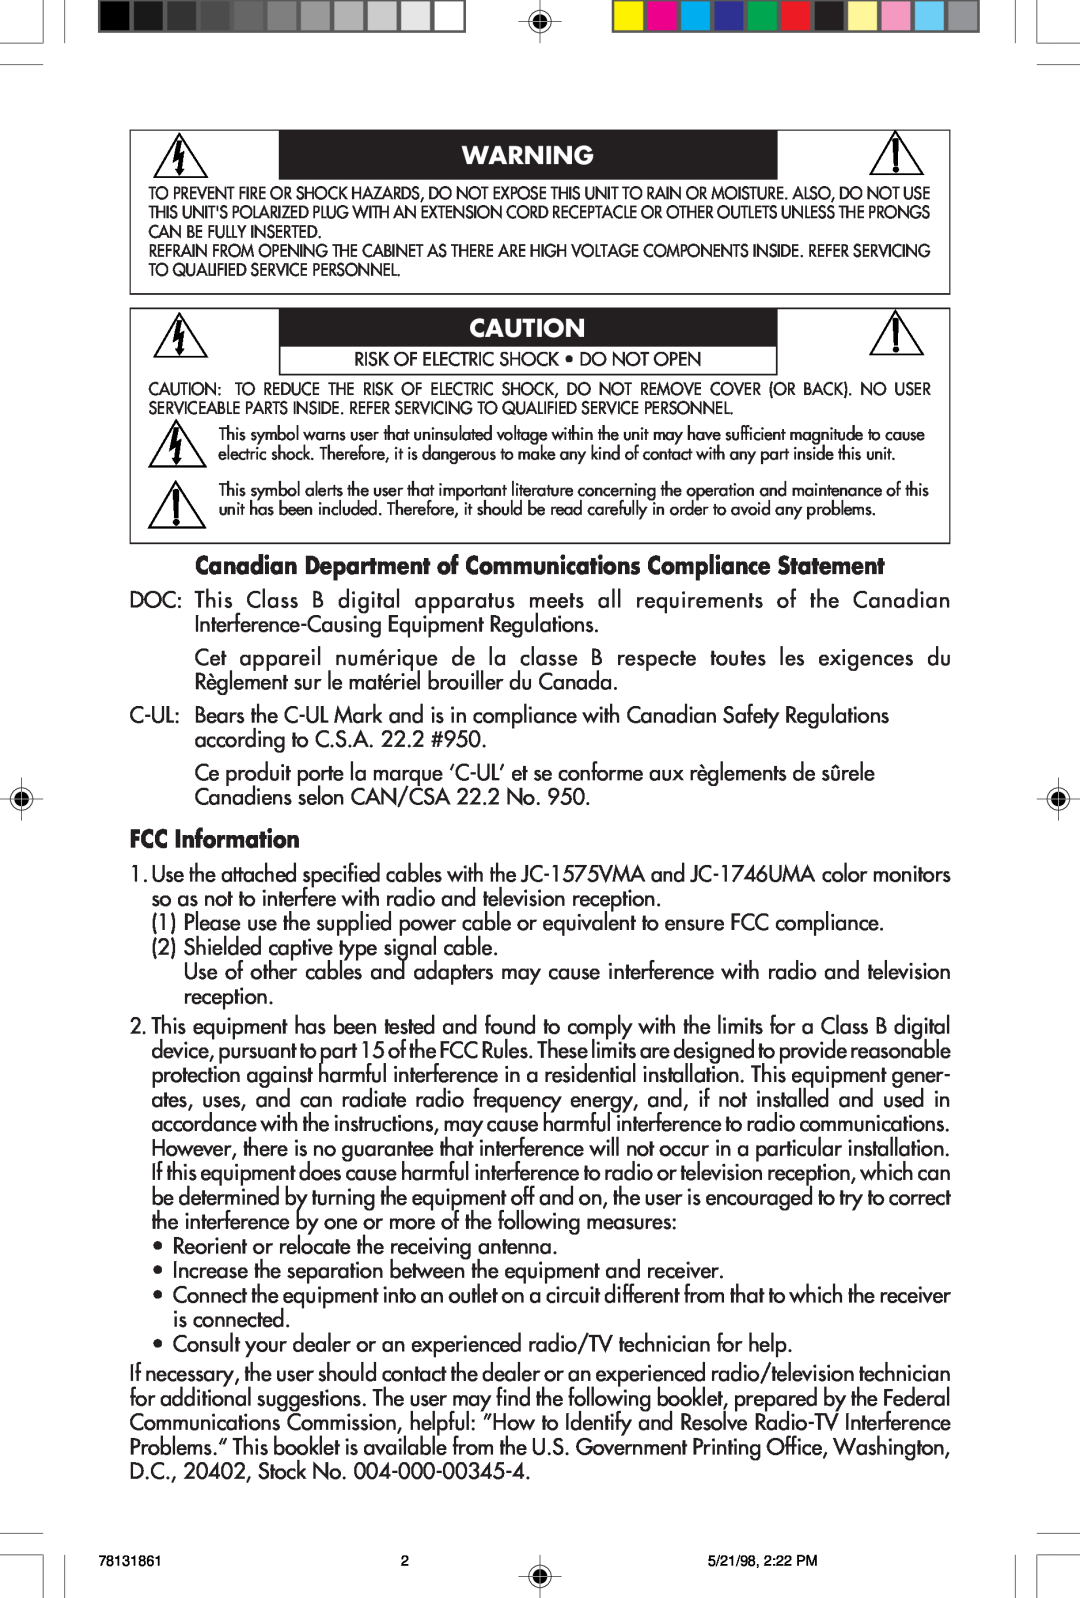 NEC E700, E500 user manual Canadian Department of Communications Compliance Statement, FCC Information 